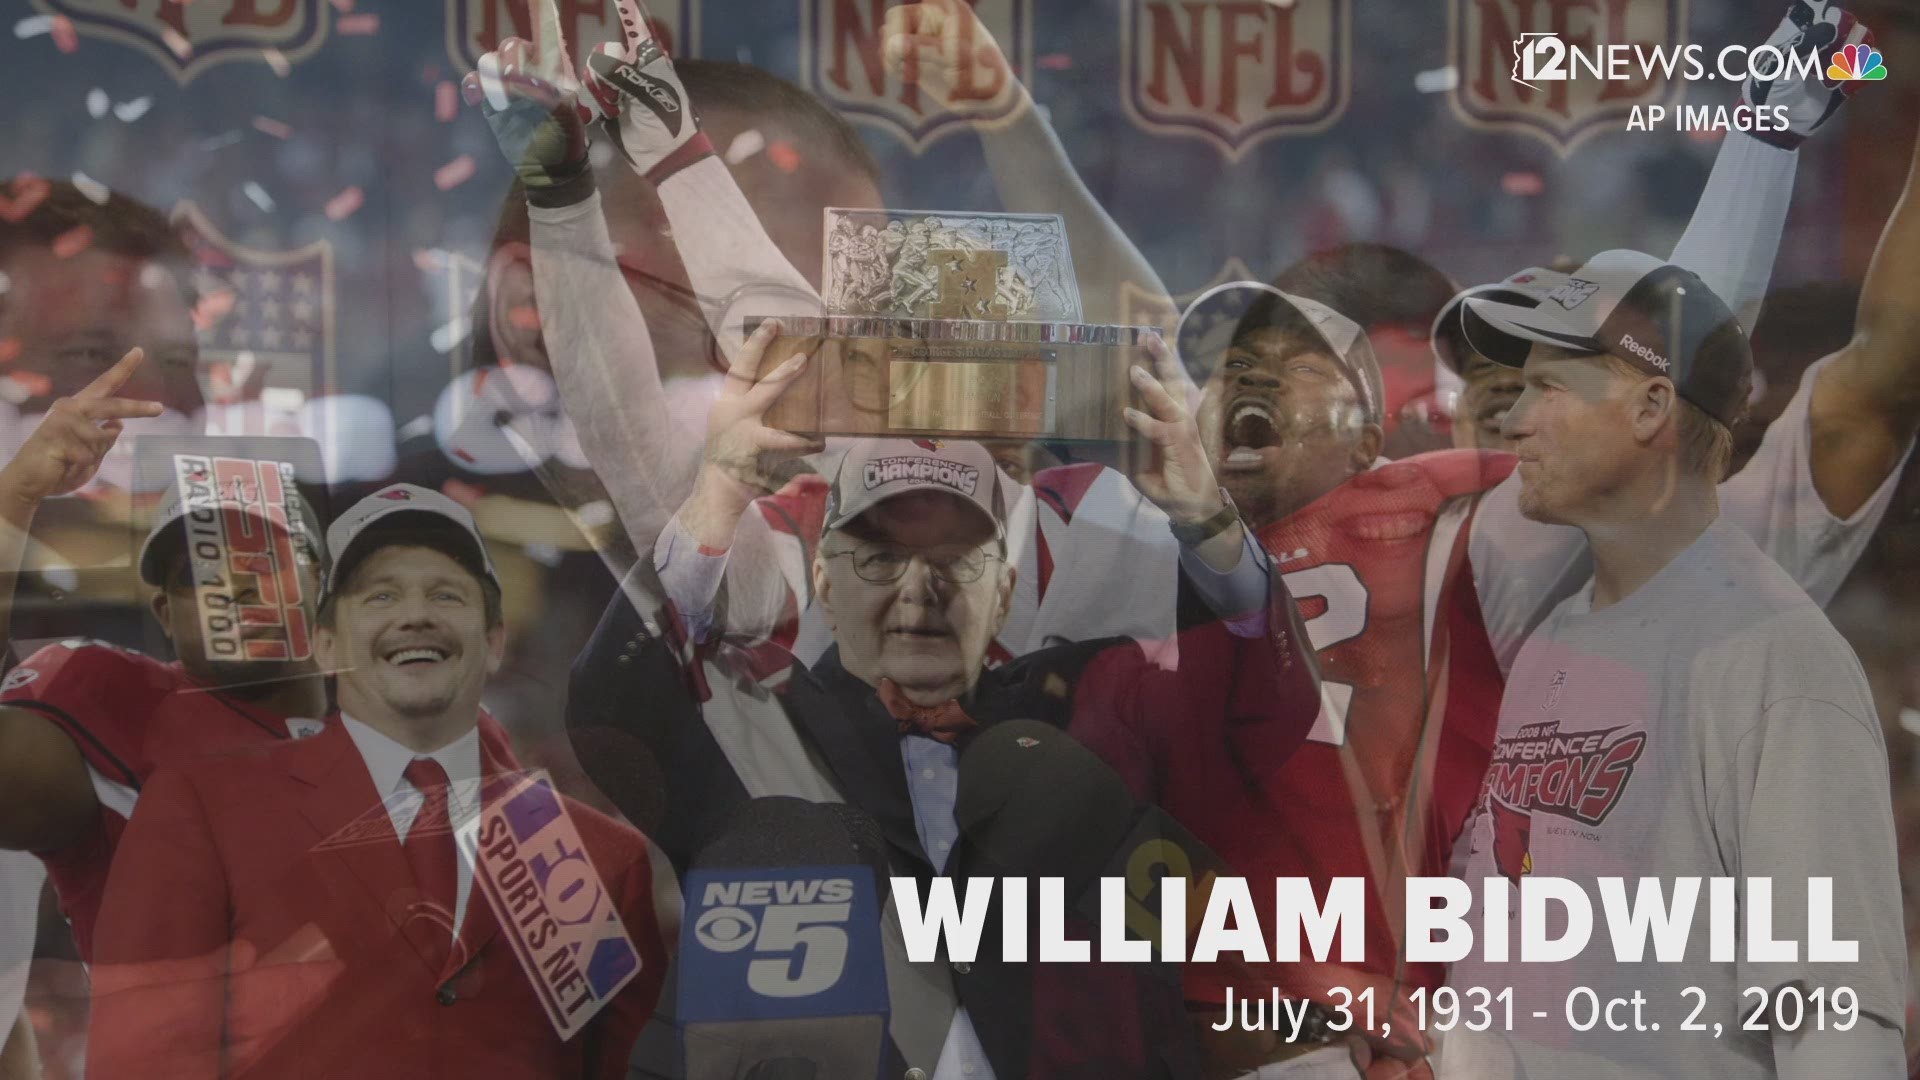 The Arizona Cardinals announced Wednesday that owner William V. Bidwill has died at the age of 88.
Bill Bidwill has been the sole owner of the franchise since 1972.